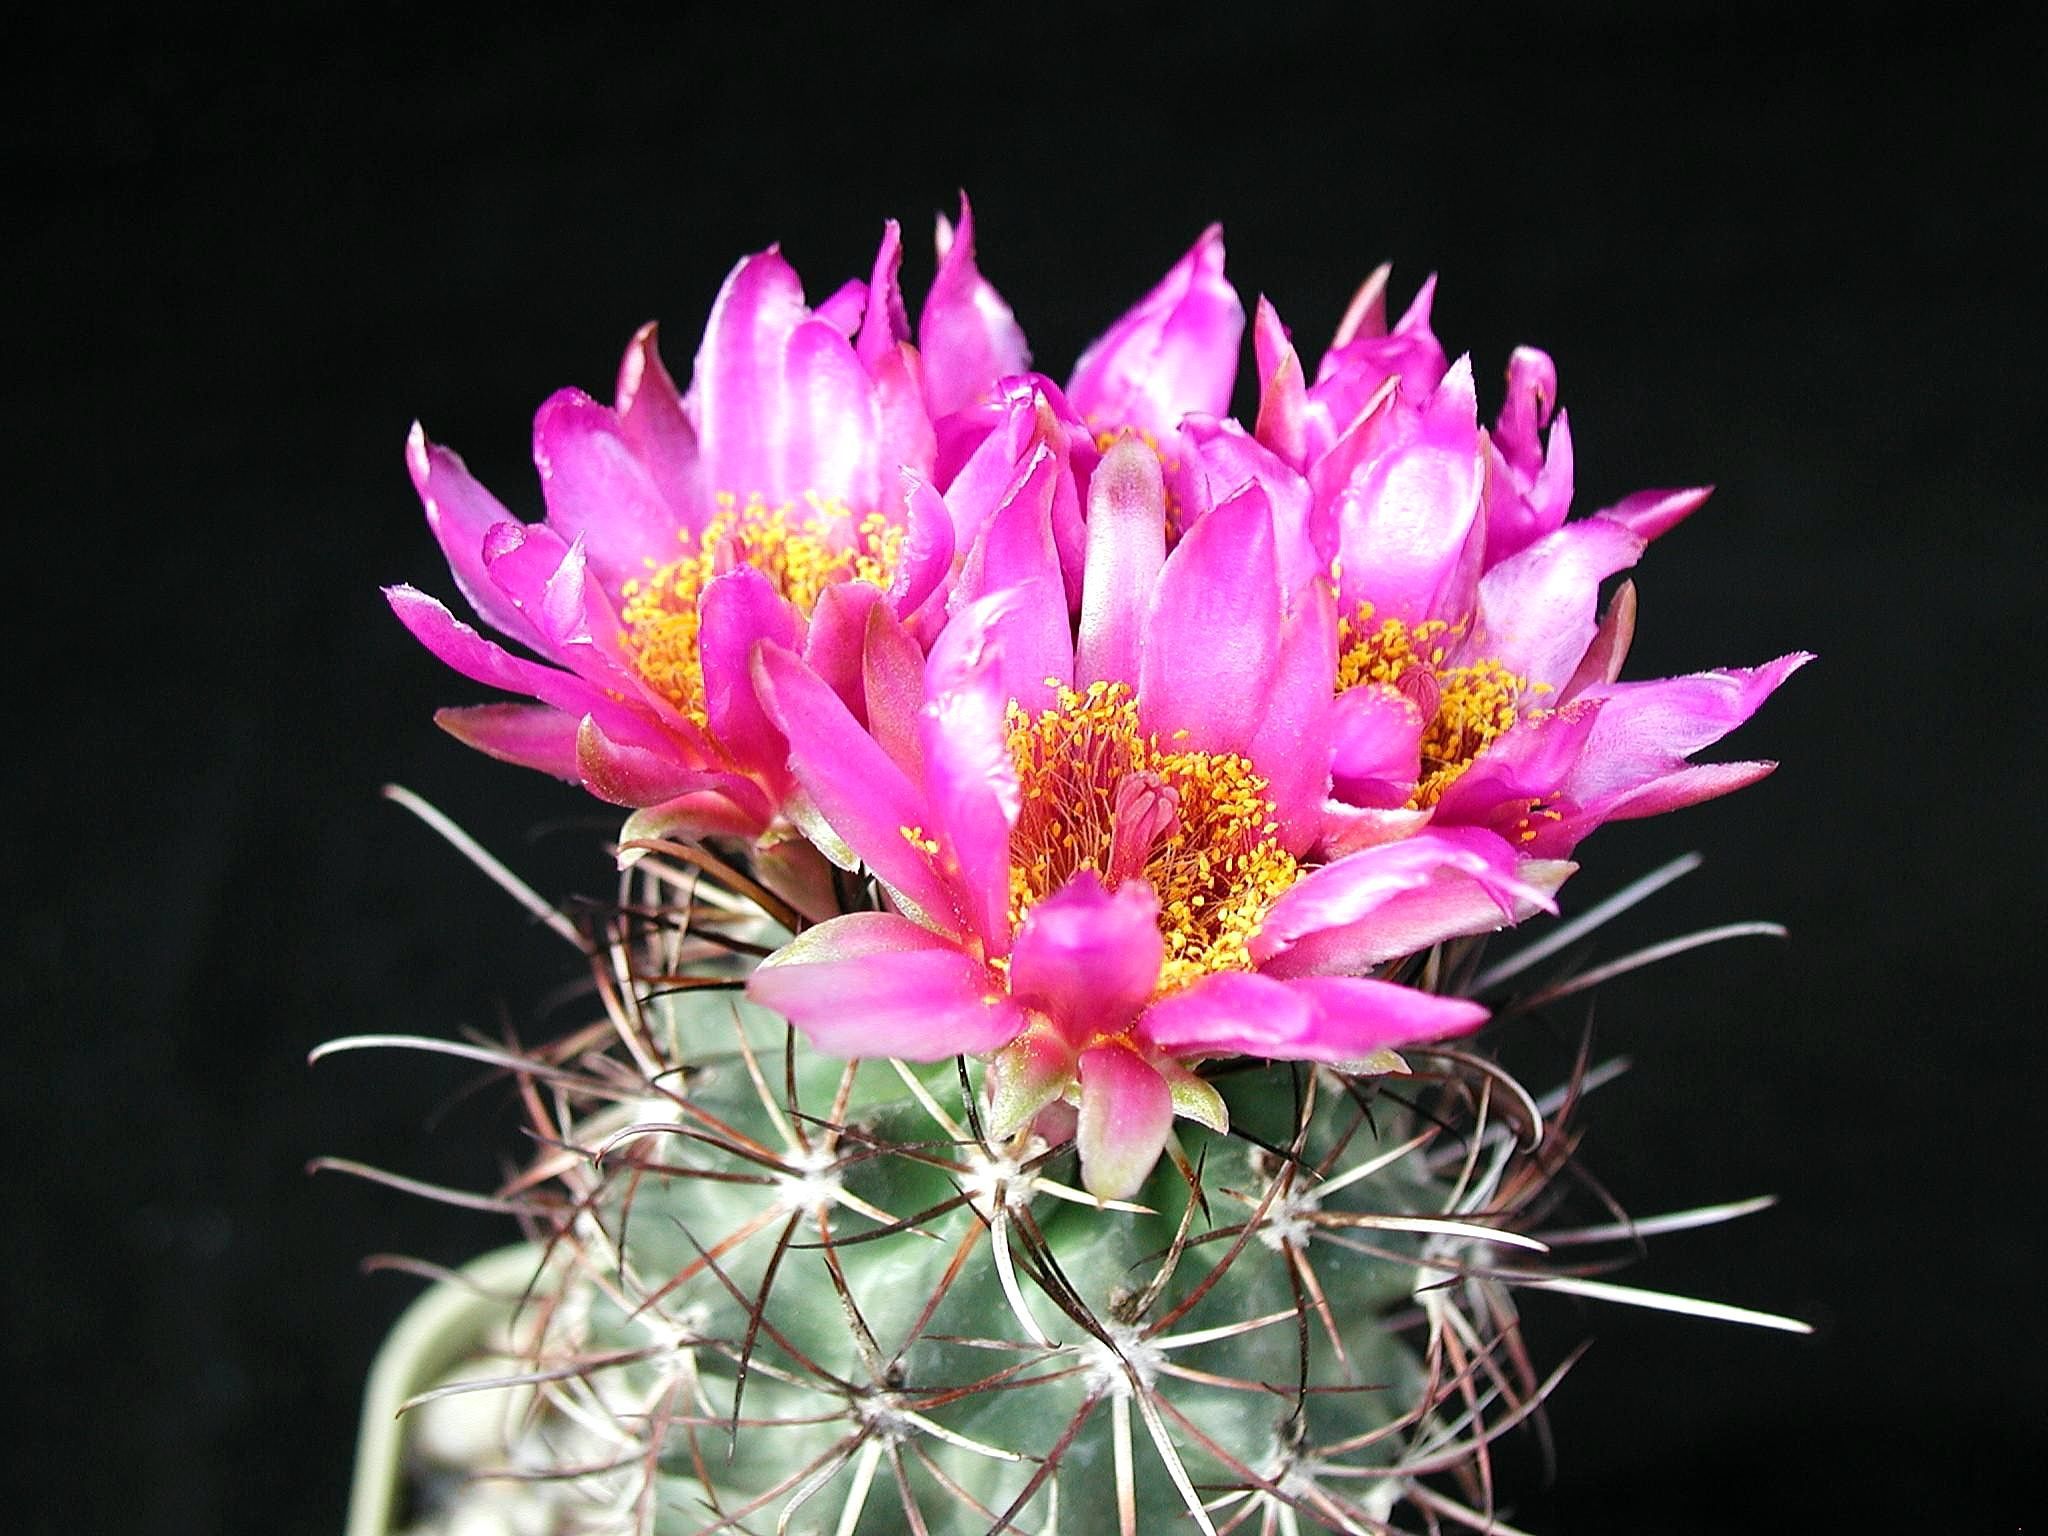 images of cactus flowers - Google Search | Creative Inspiration ...